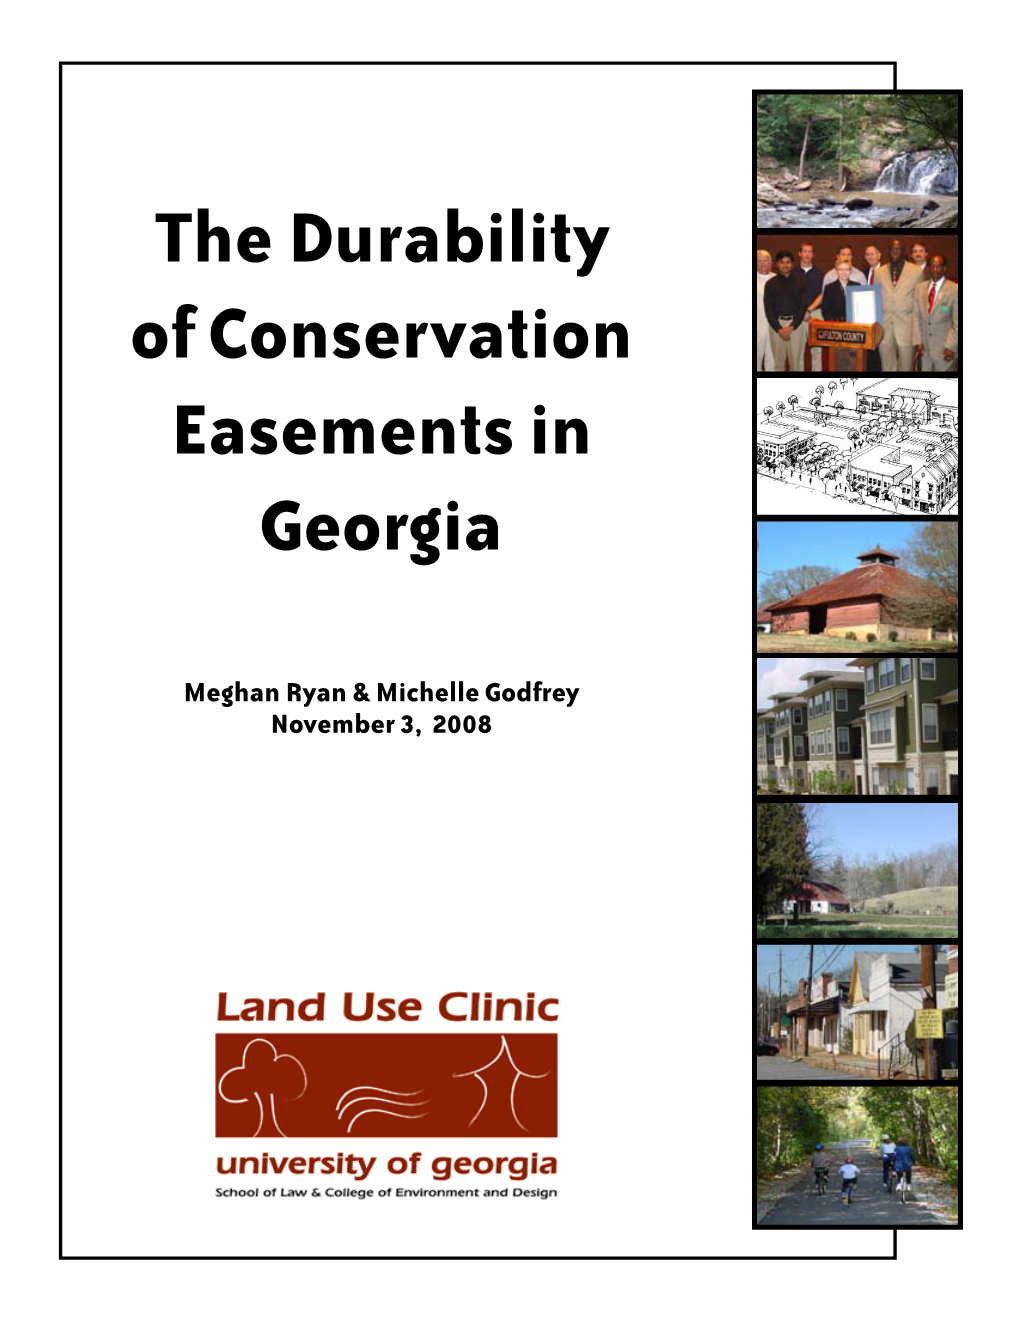 The Durability of Conservation Easements in Georgia